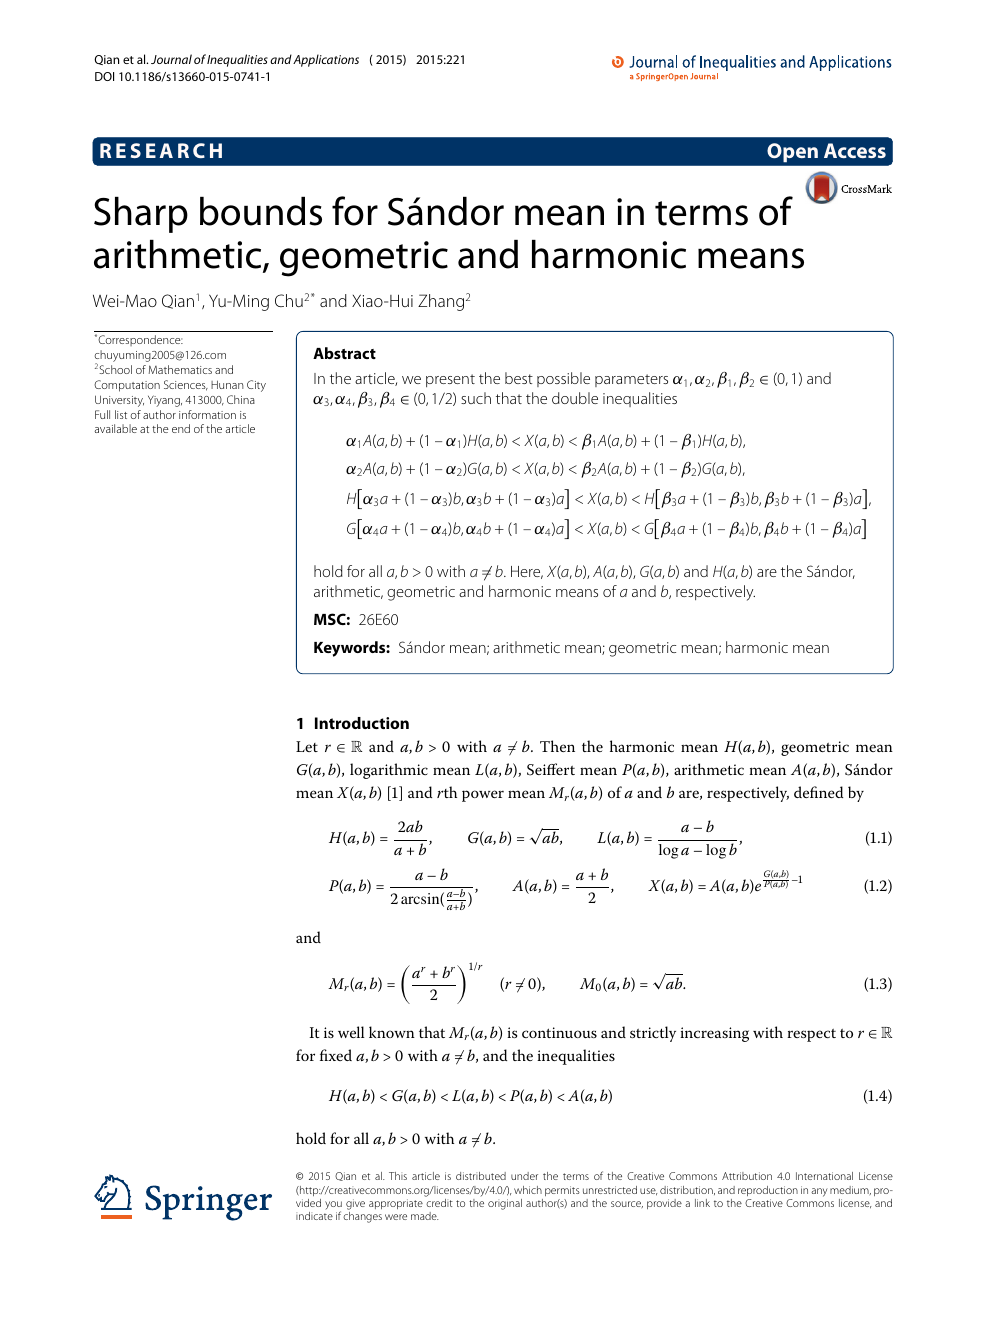 Sharp Bounds For Sandor Mean In Terms Of Arithmetic Geometric And Harmonic Means Topic Of Research Paper In Mathematics Download Scholarly Article Pdf And Read For Free On Cyberleninka Open Science